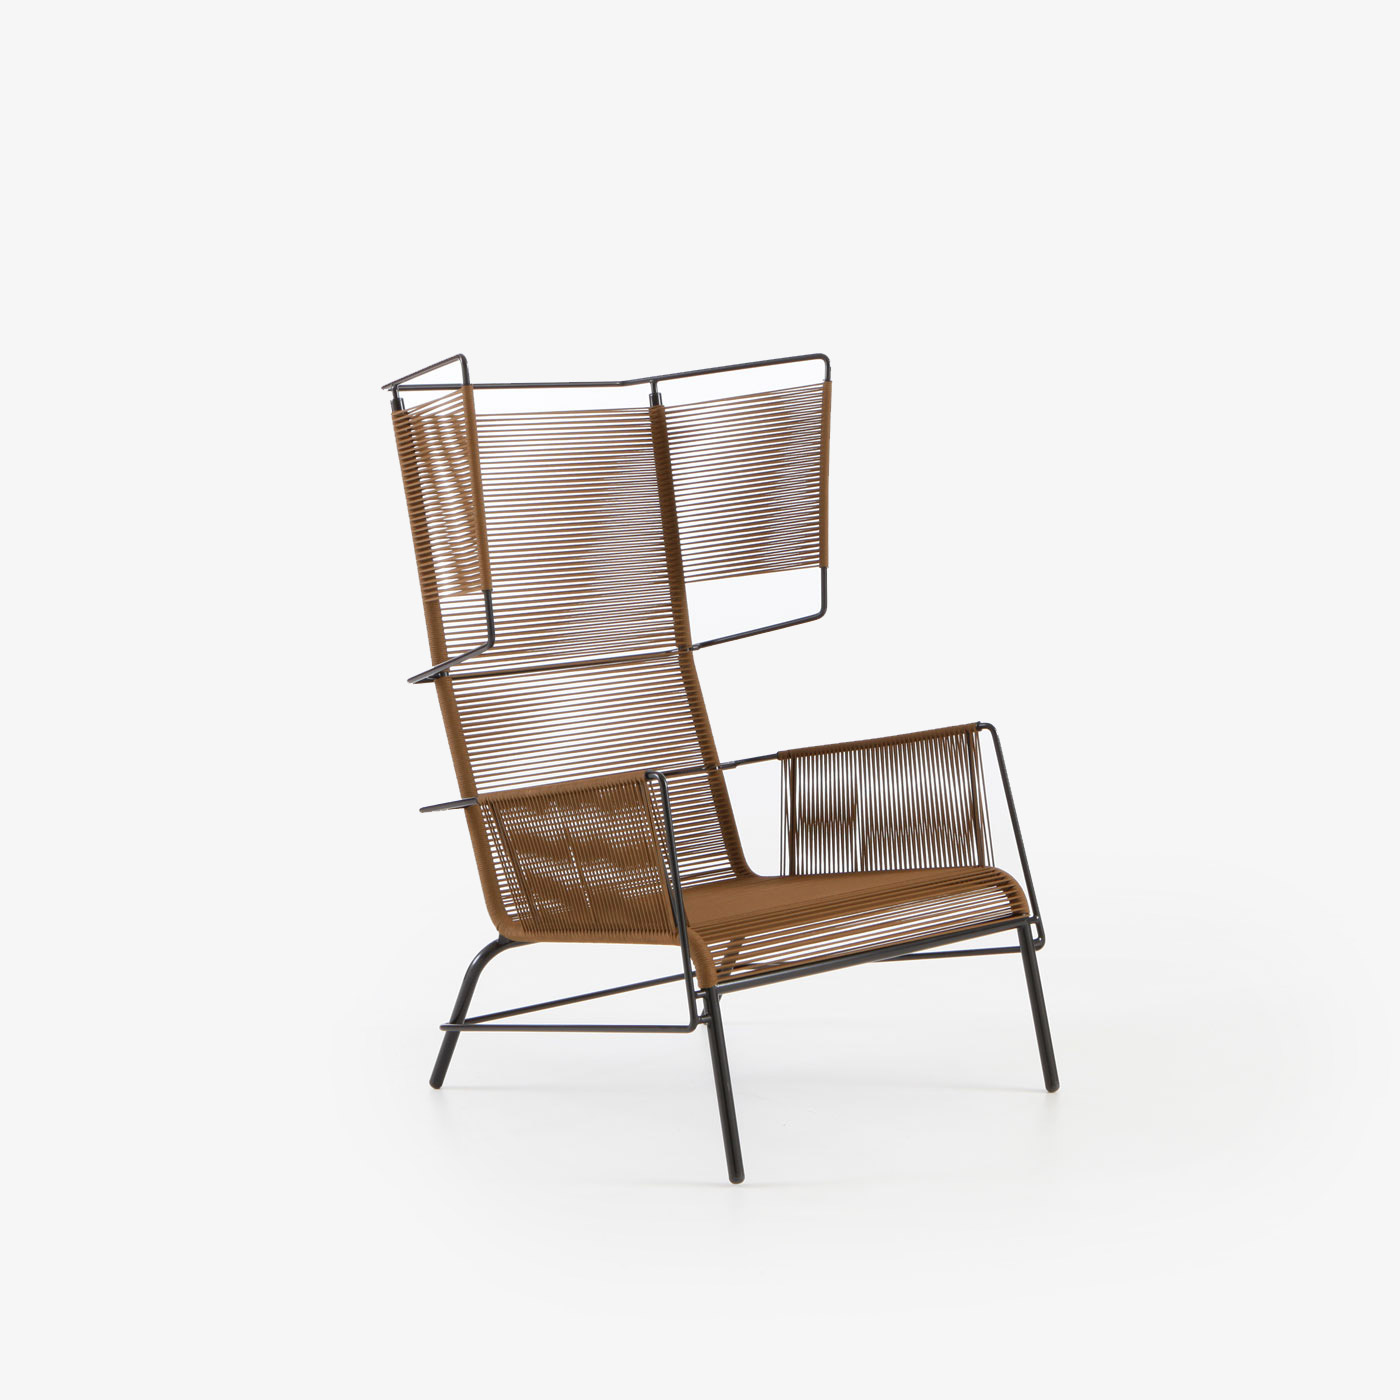 Image Fauteuil tabac indoor / outdoor 2